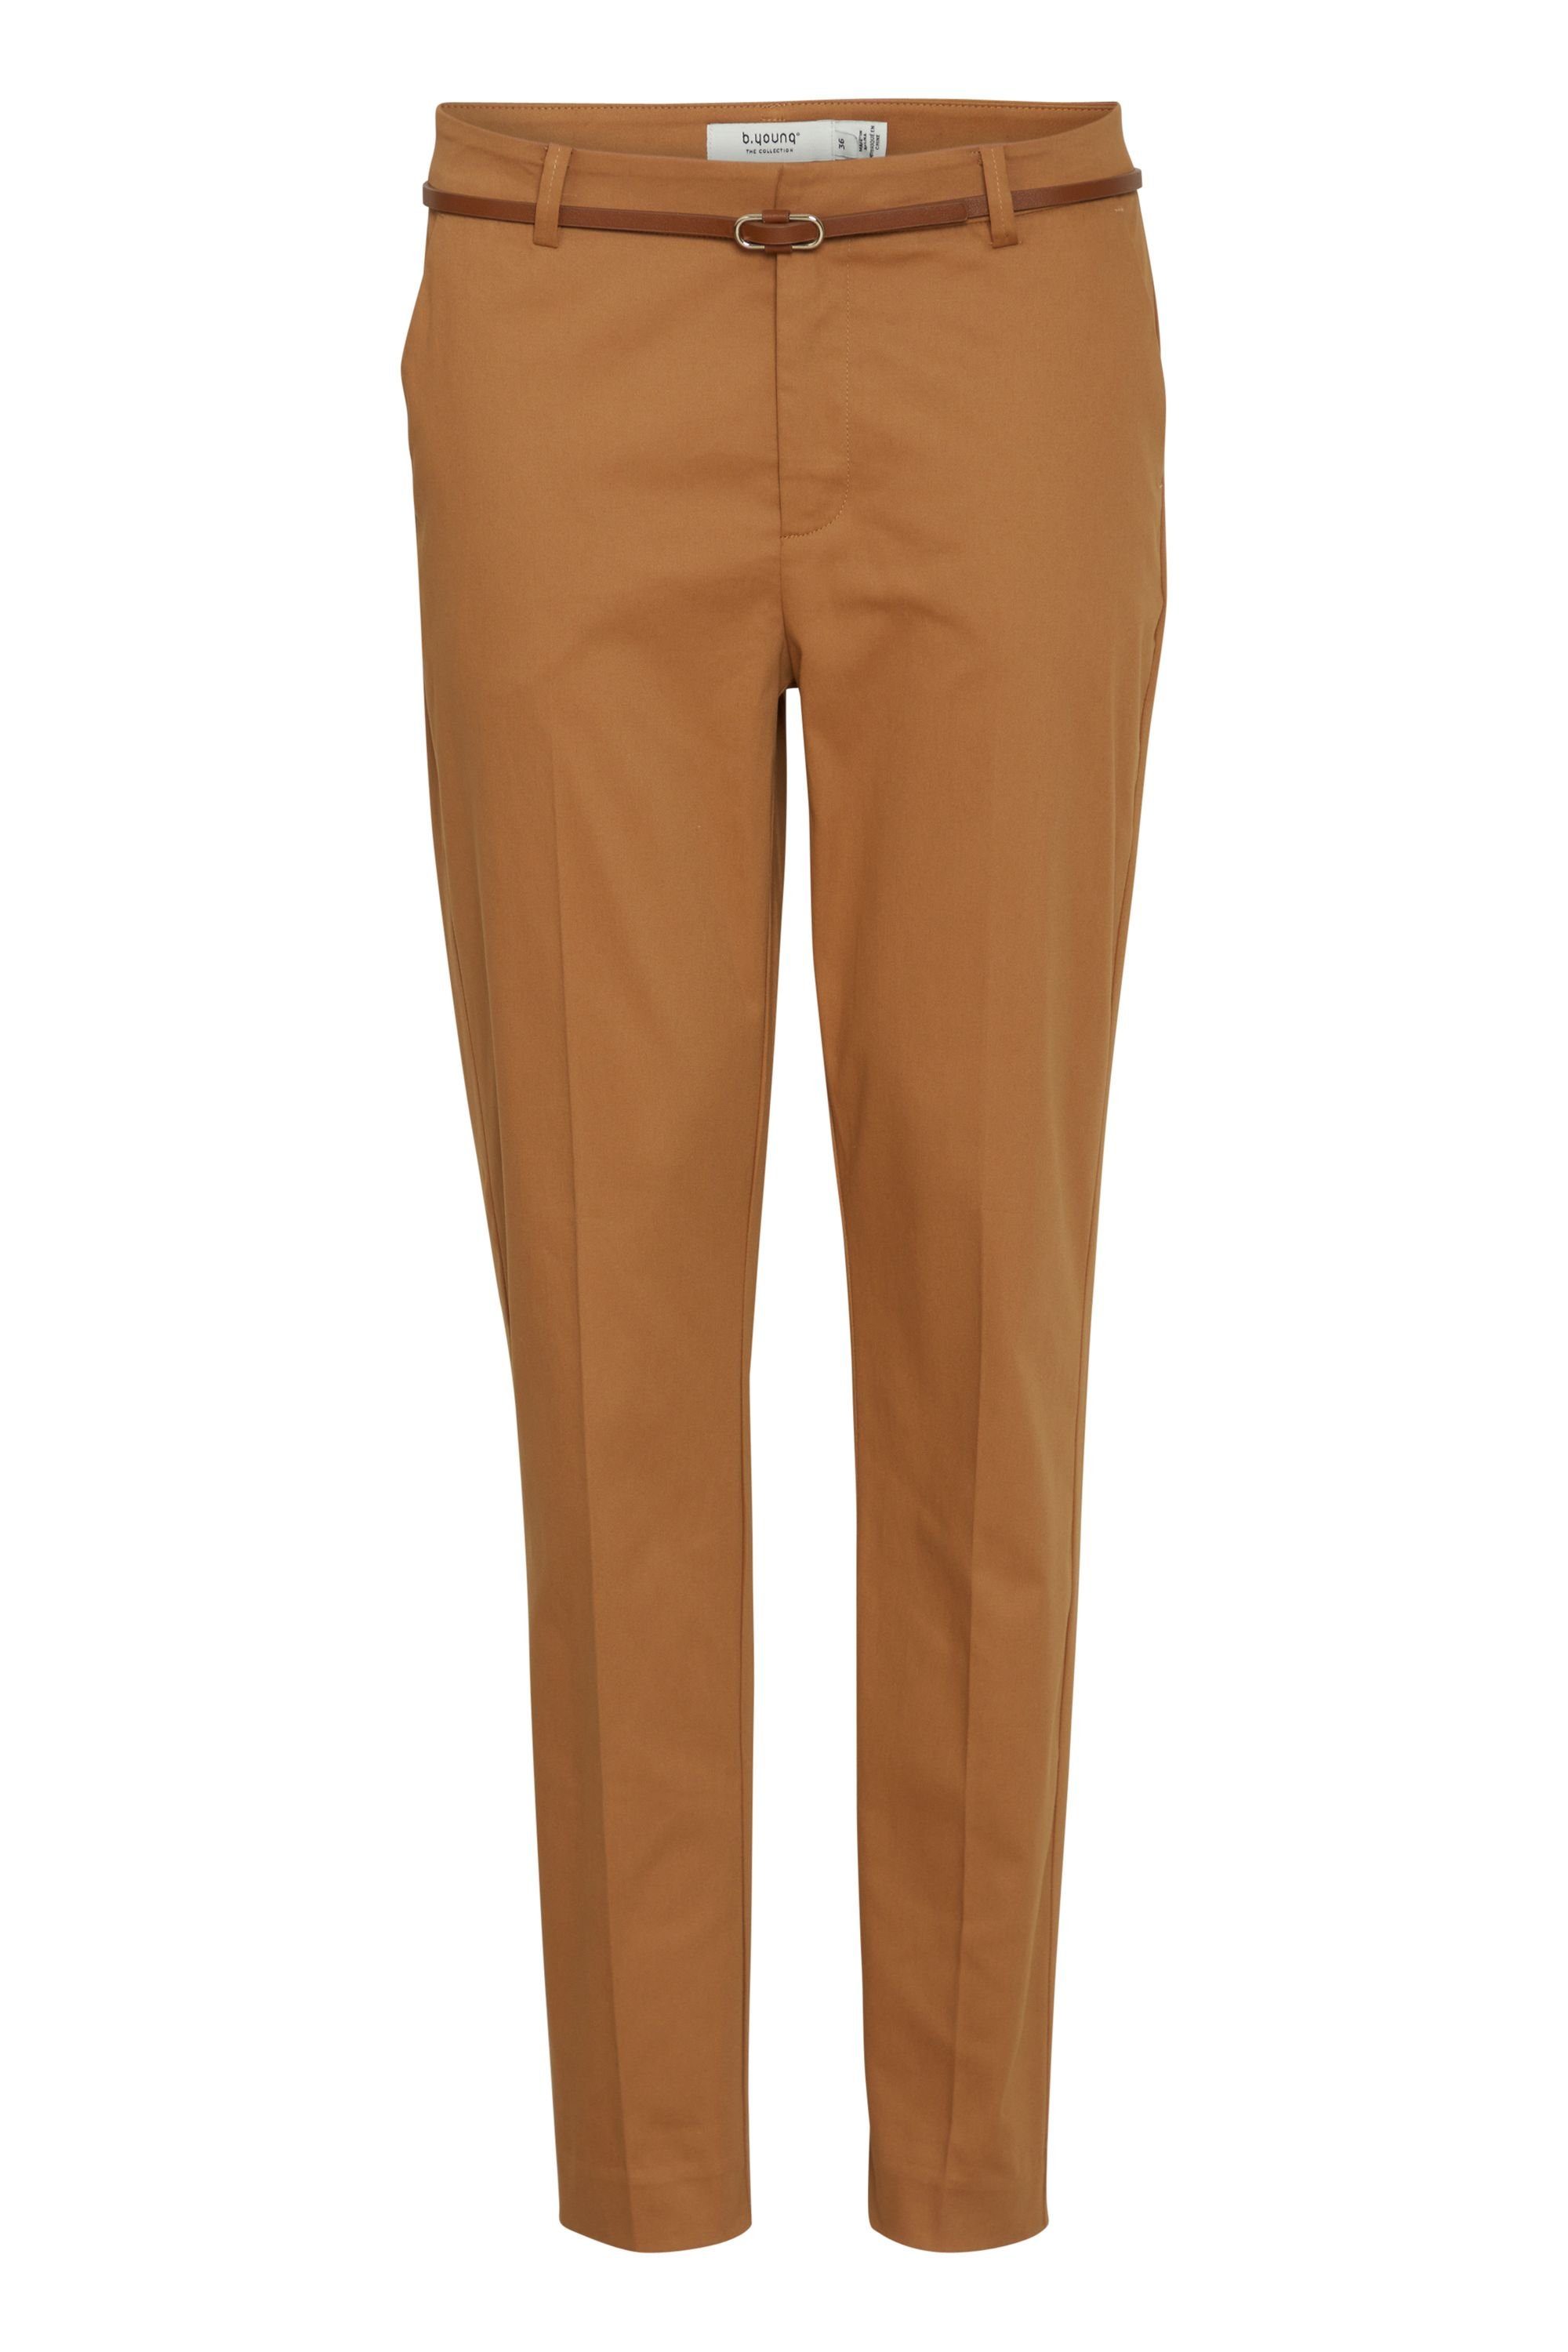 Chinohose 20803473 b.young coolen Hose BYDays im Lange Toasted pants cigaret - (181029) 2 Coconut Chinostyle